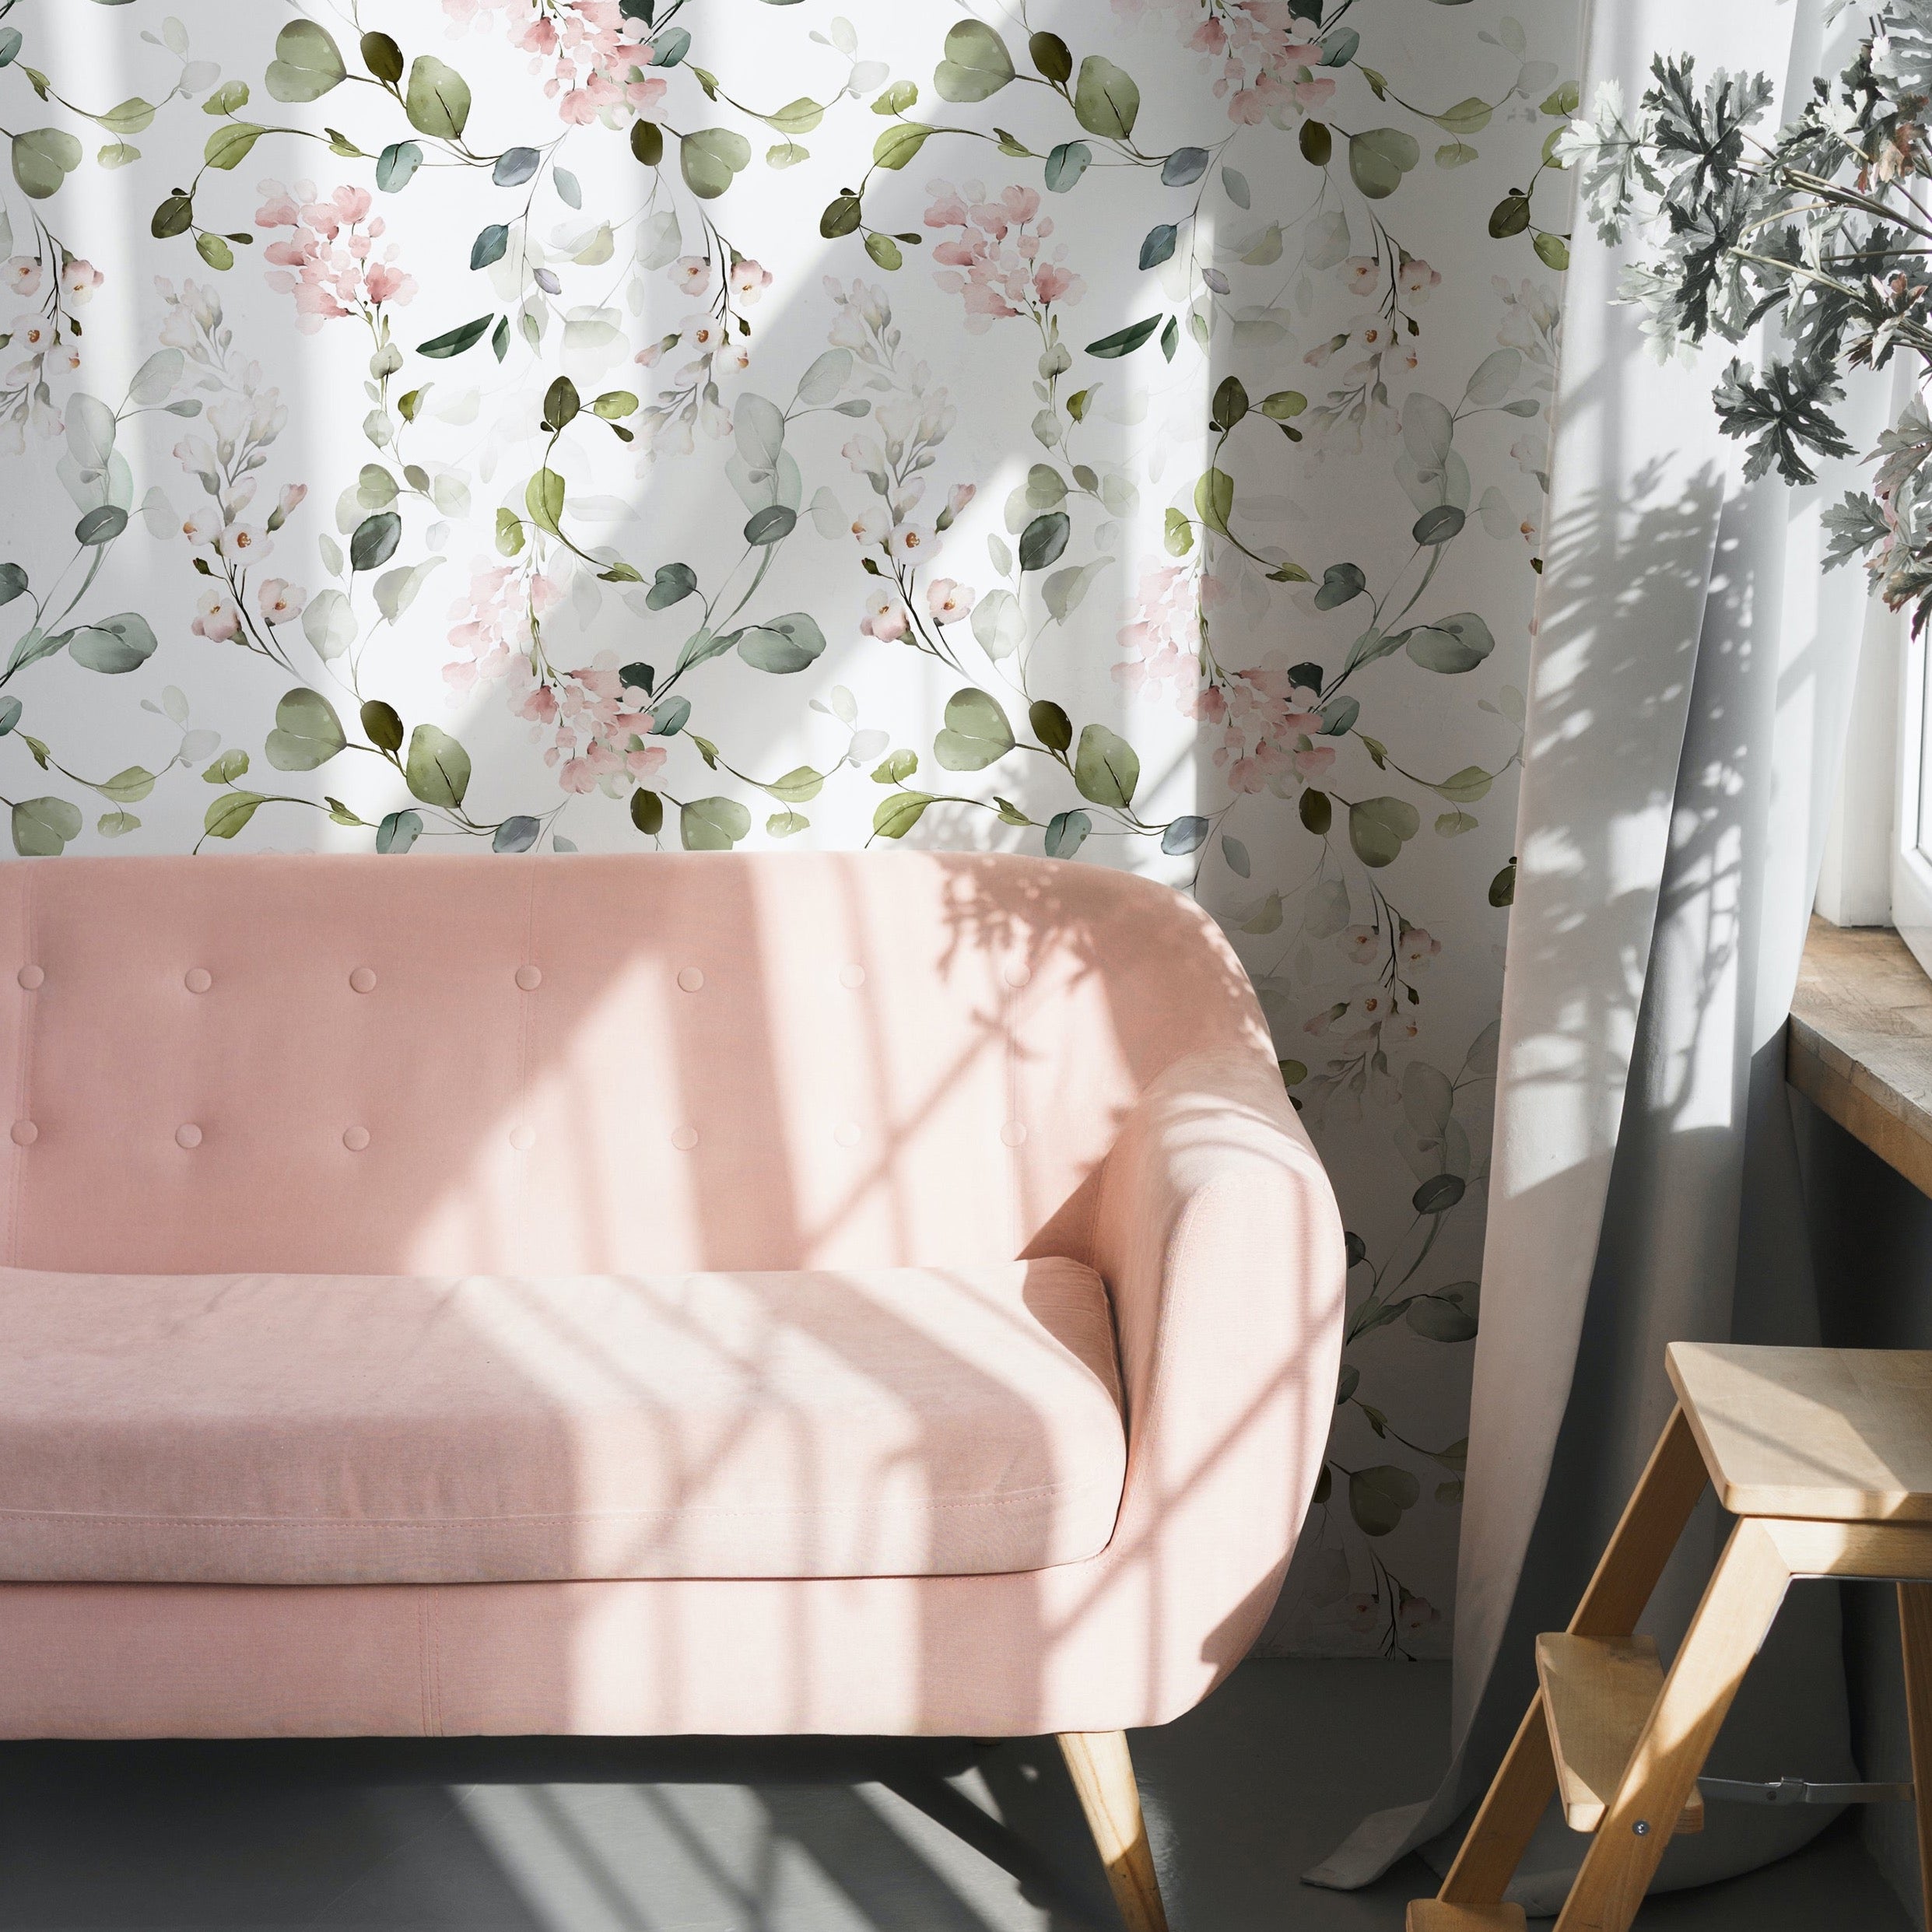 A chic living space illuminated by natural light, highlighting the Pink Floral & Herbs Wallpaper, adorned with blush pink florals and greenery. The wall art complements a plush, pastel pink tufted sofa and a minimalist wooden stool, evoking a fresh, botanical ambiance.